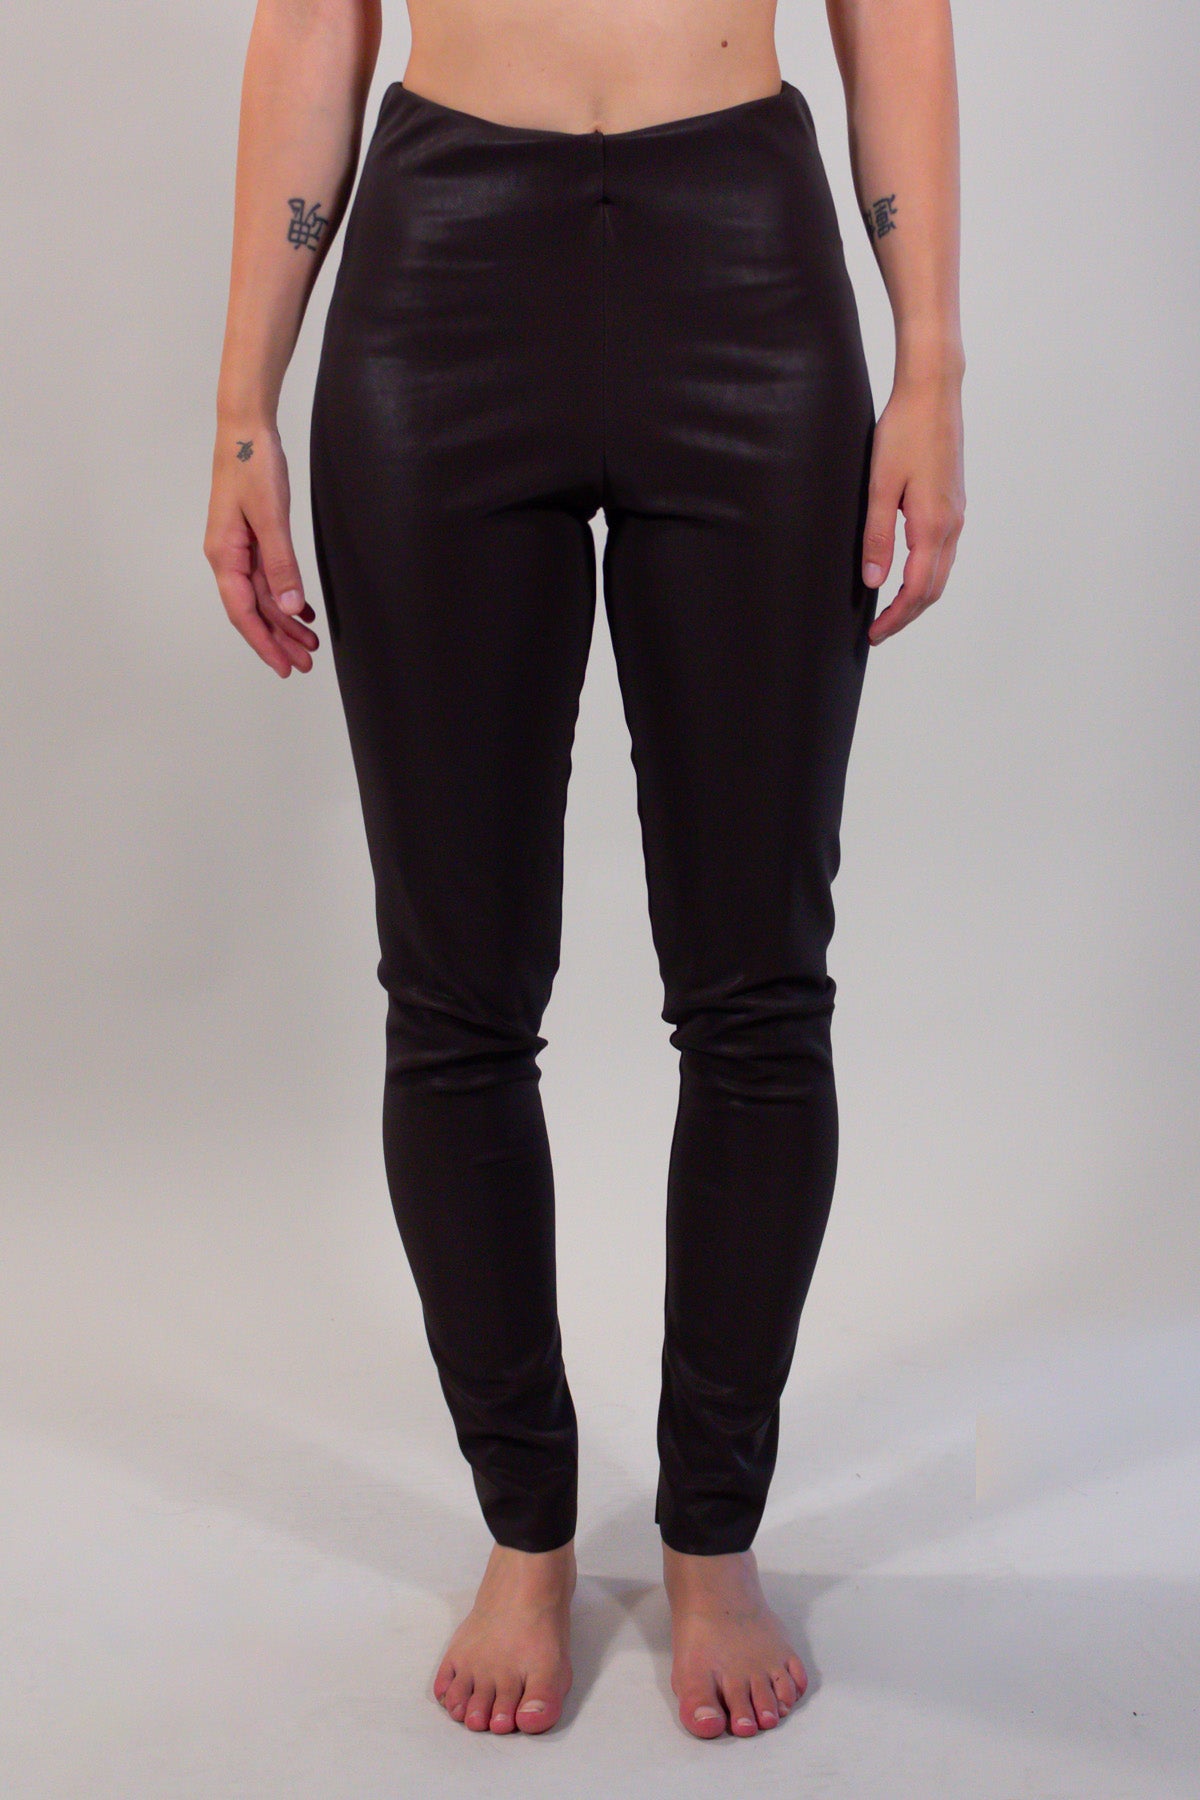 RUBBERED ECO-LEATHER LEGGINGS